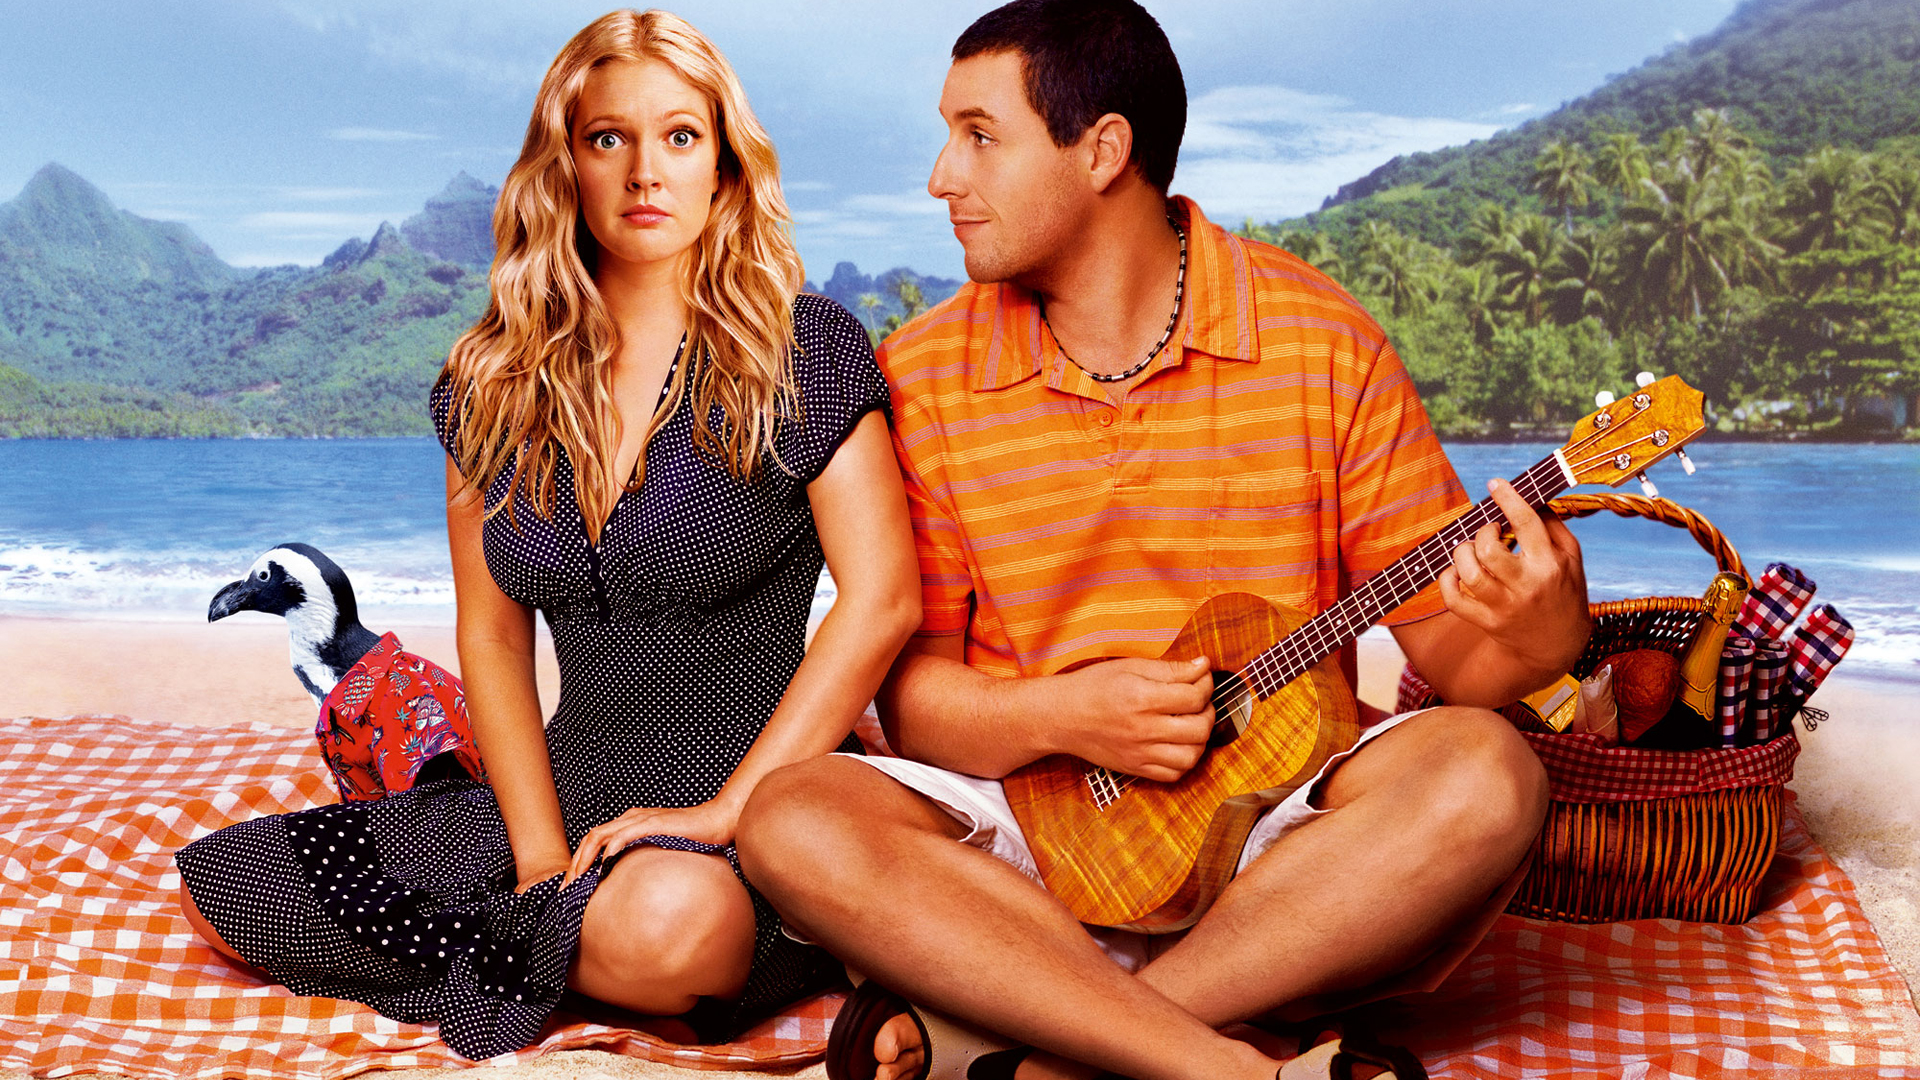 Cast of 50 first dates